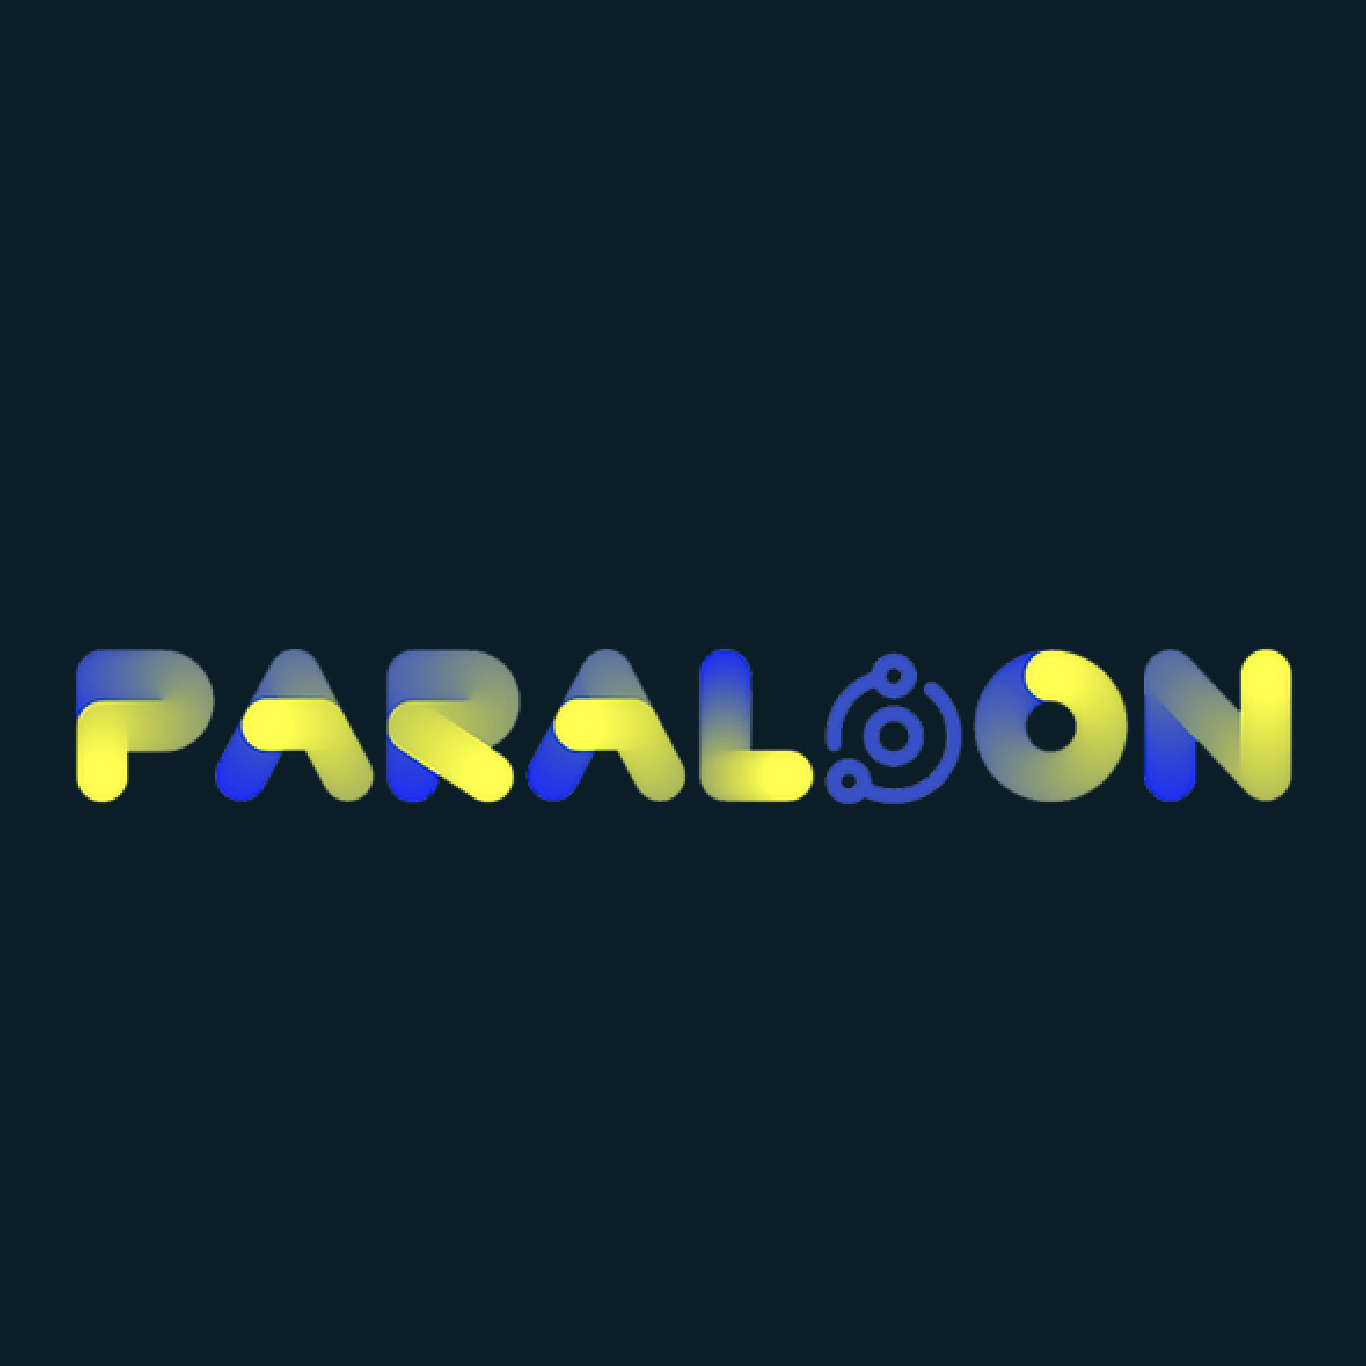 ParaLoon's goal is to develop a solar energy solution tailored for satellites and space assets, using an inflatable parabolic balloon.